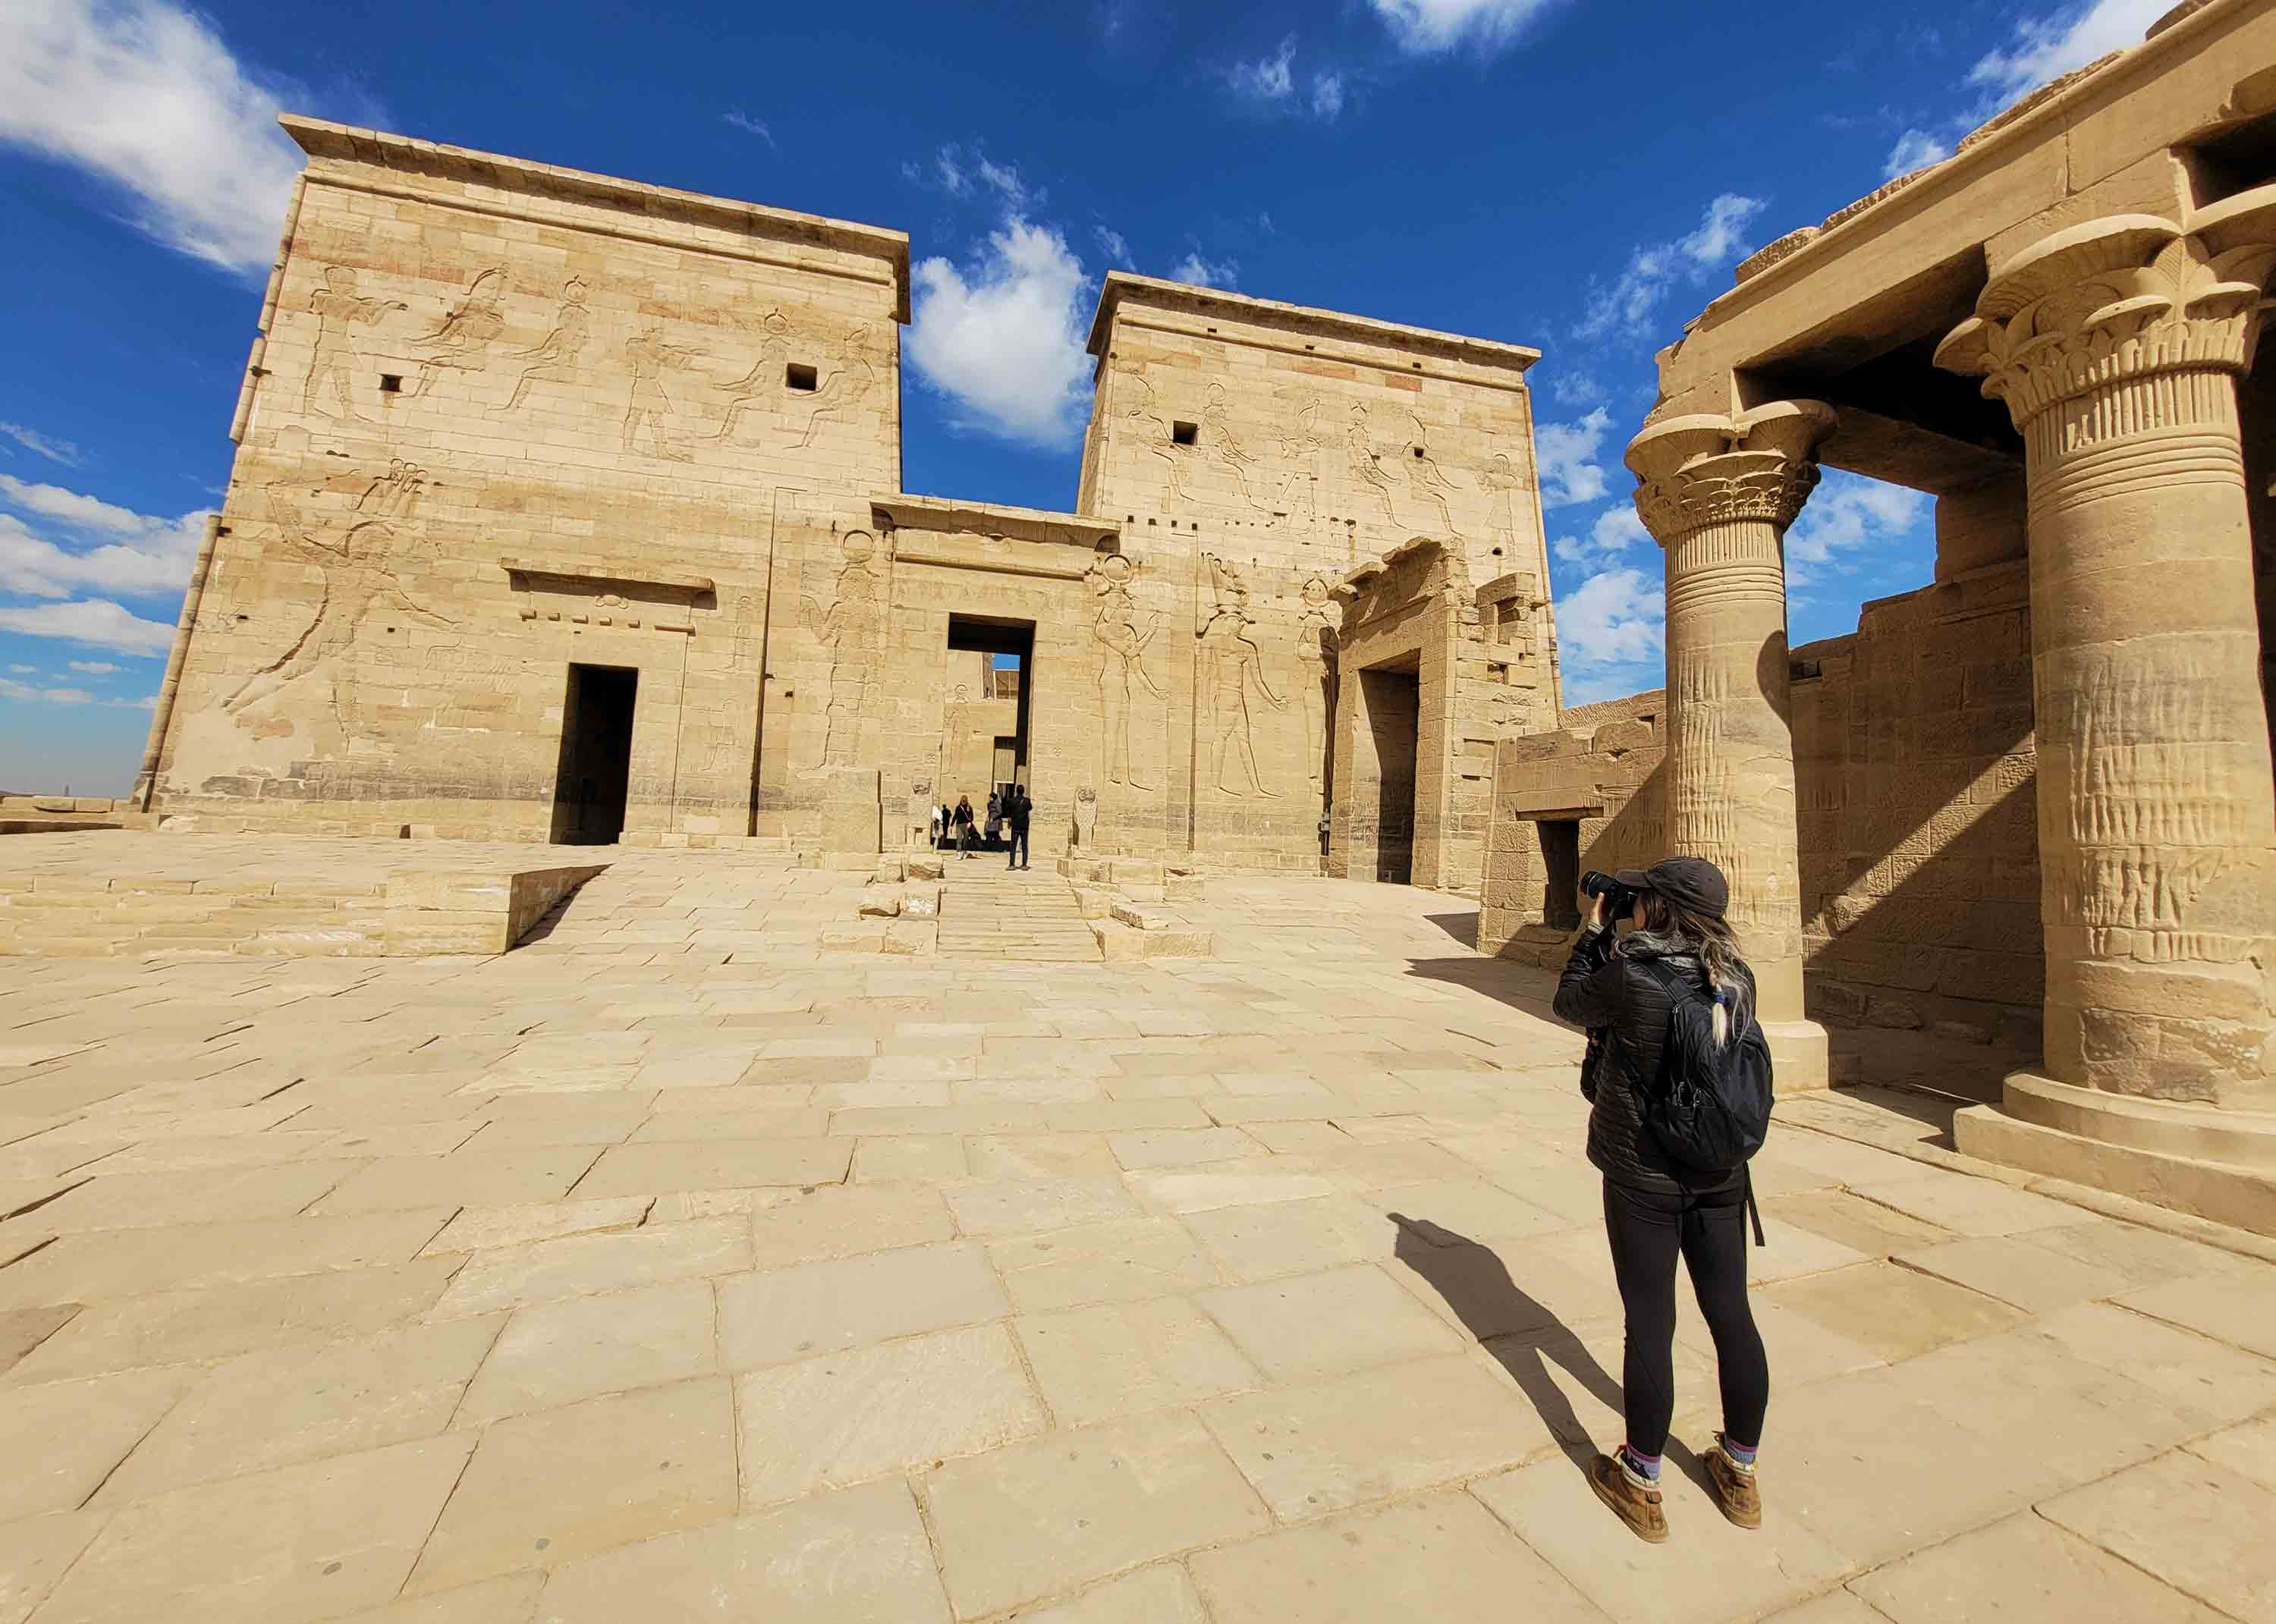 Snapping some photos at Philae Temple in Aswan, Egypt